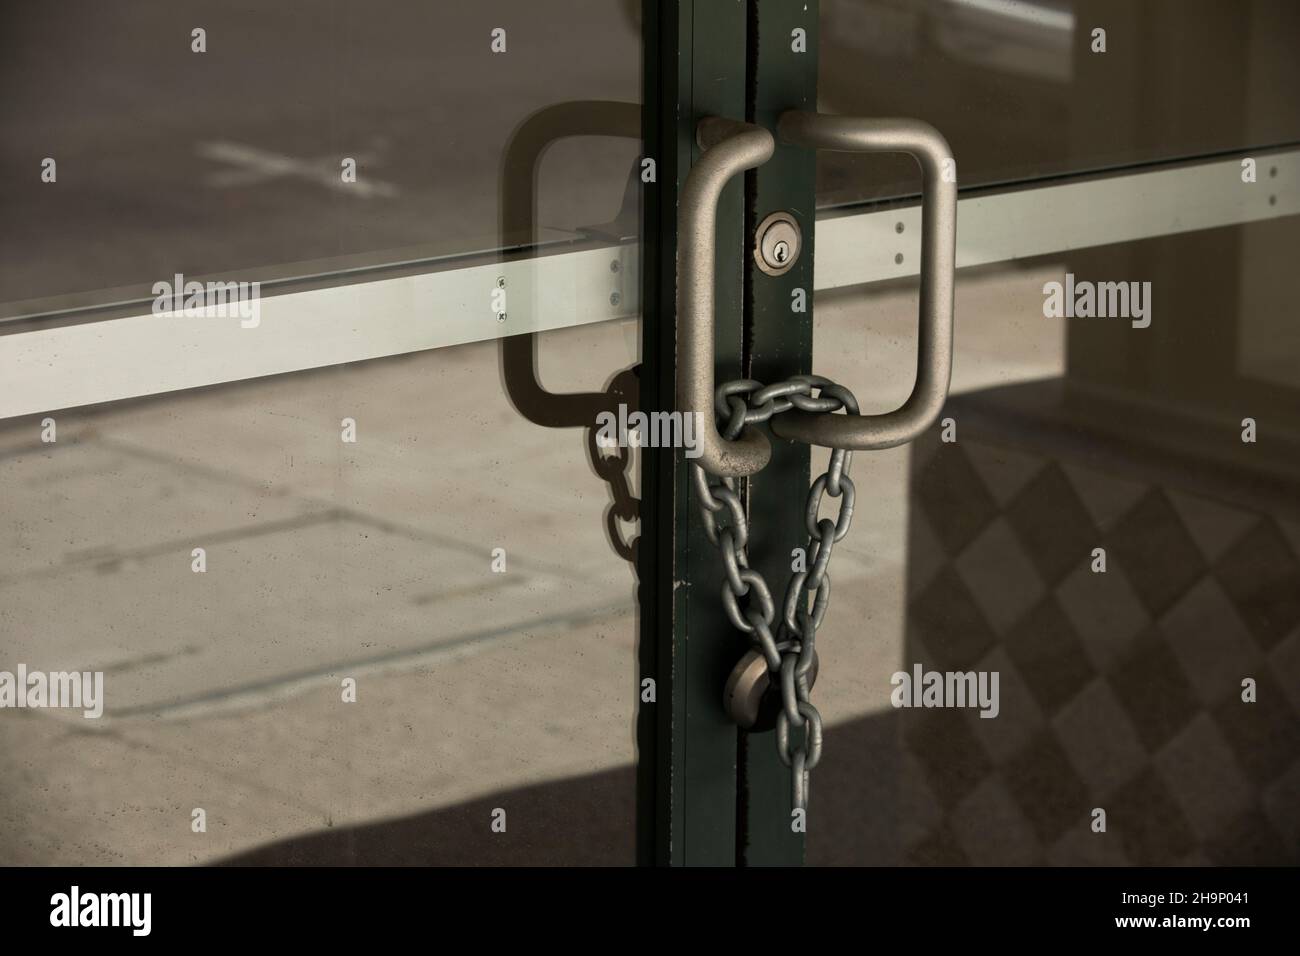 Chains lock together an entry way door of a closed business. Stock Photo